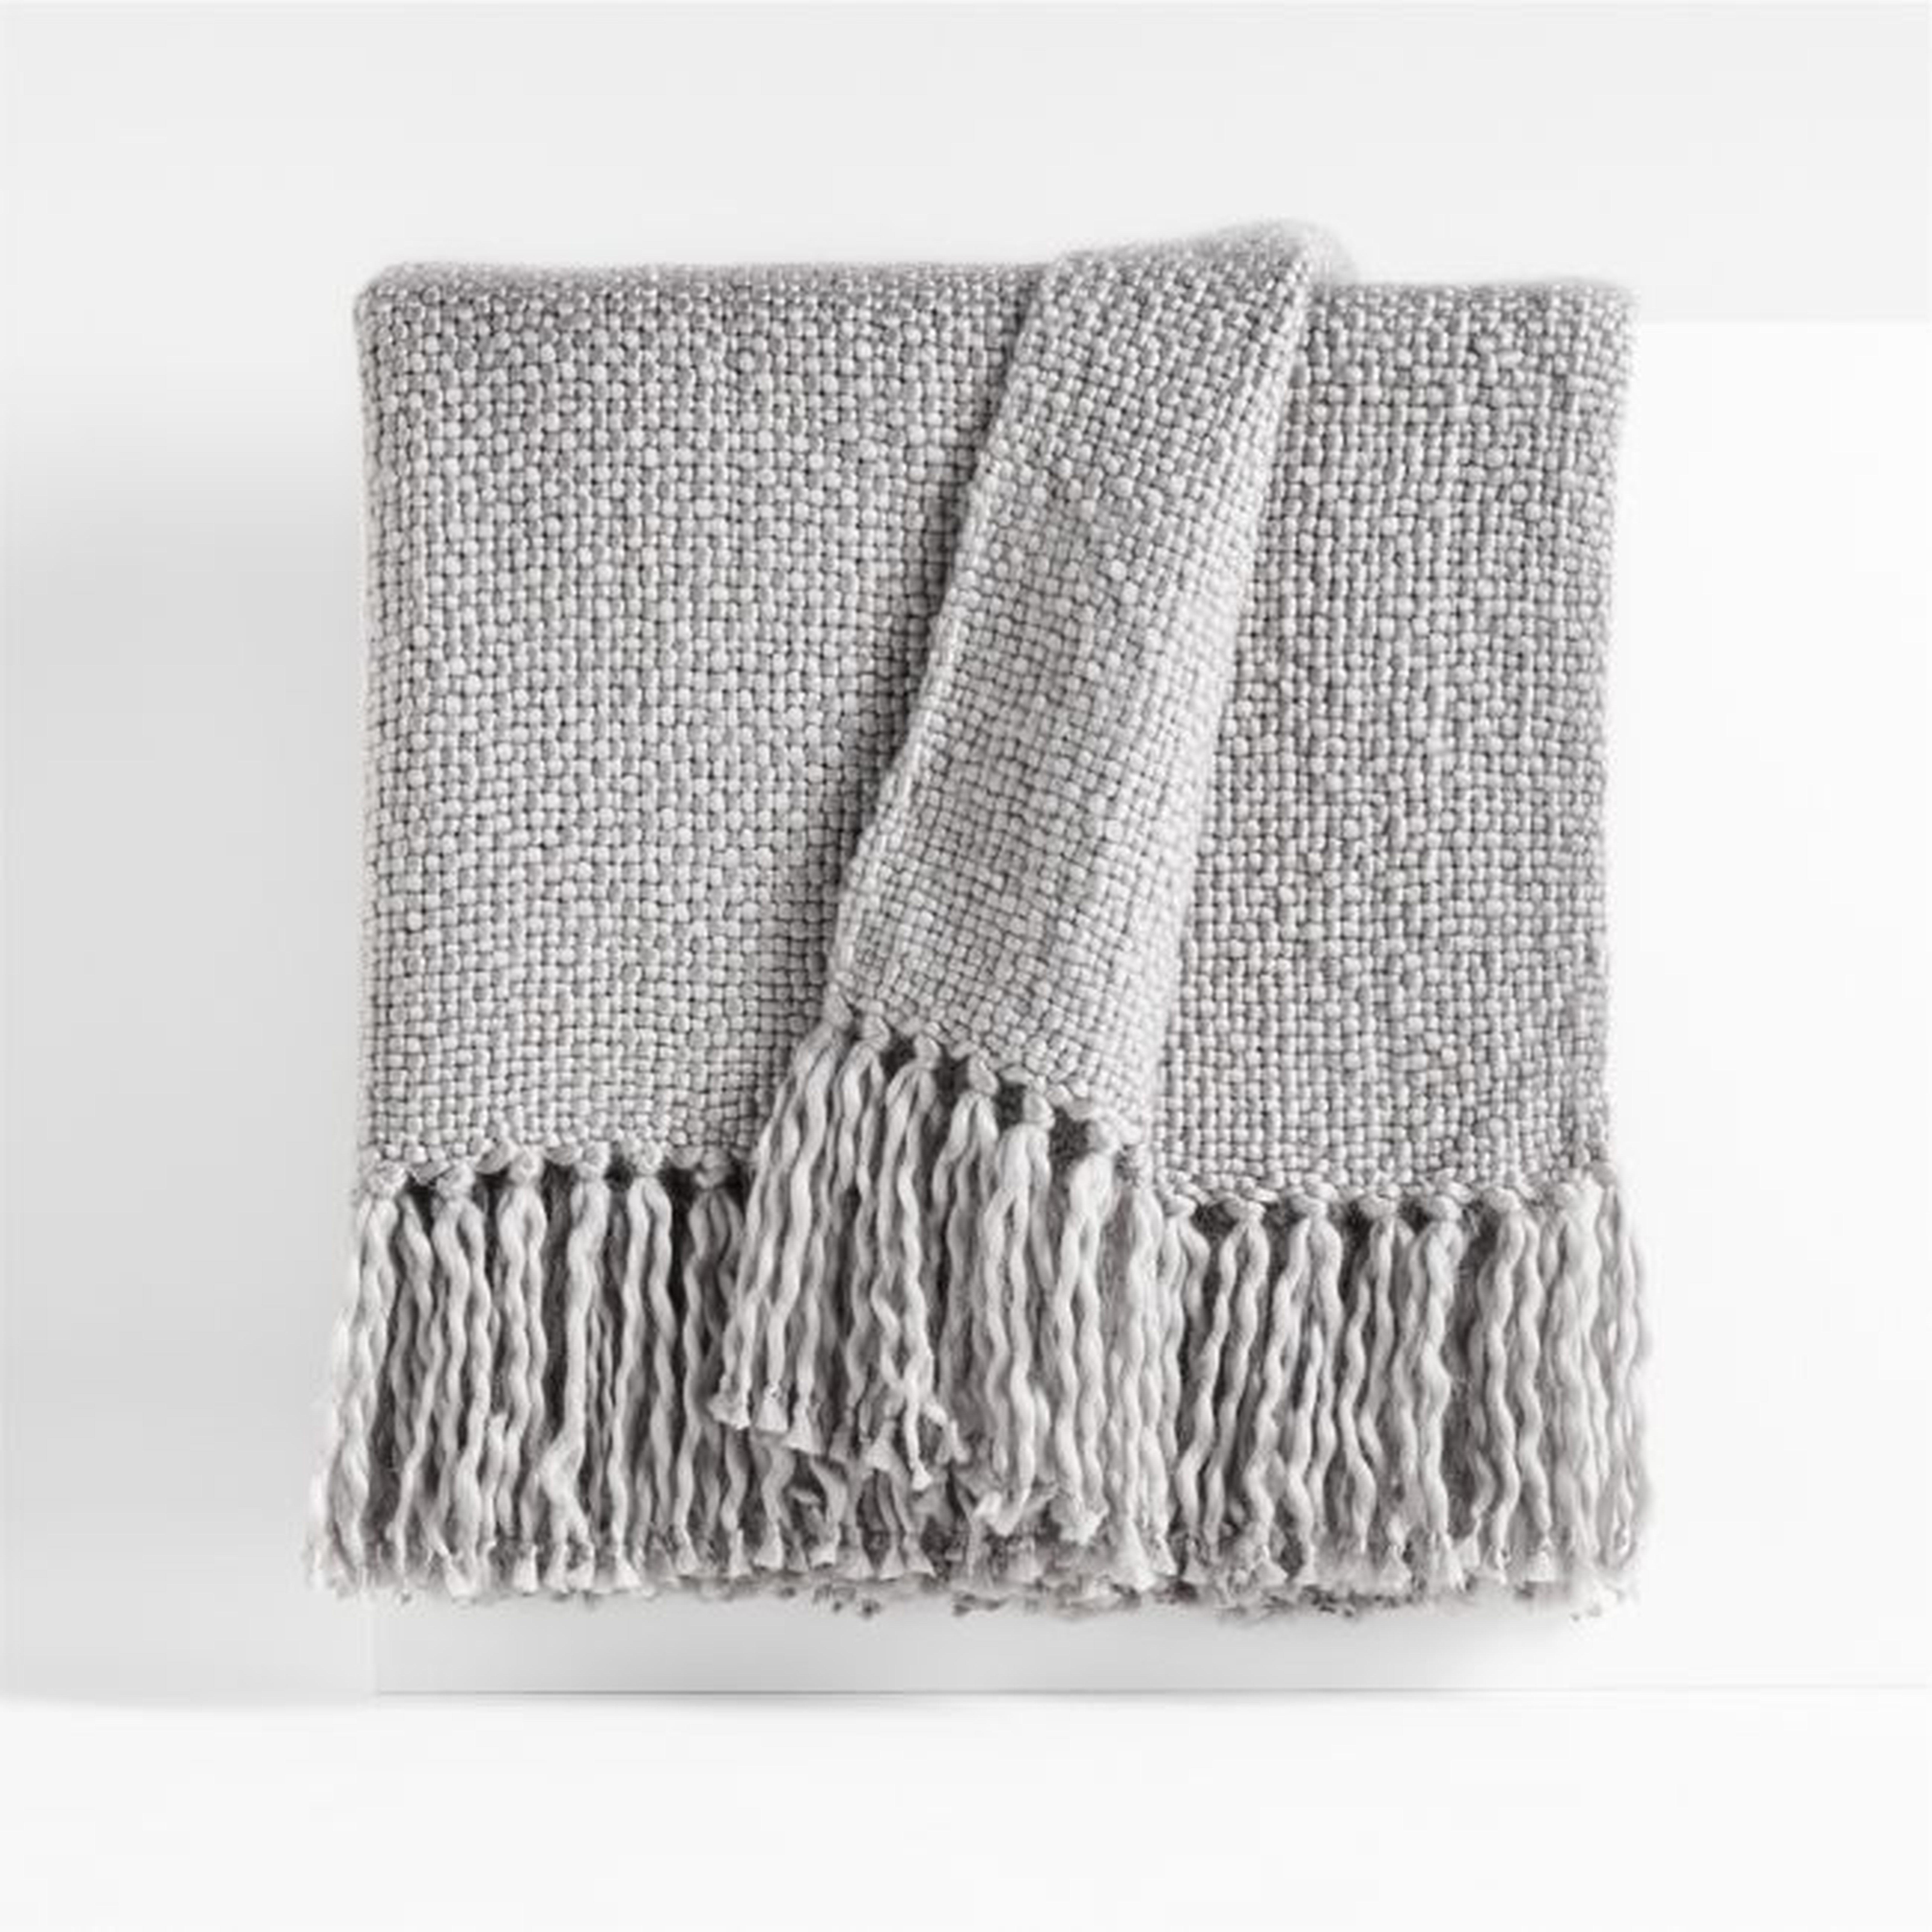 Styles 70"x55" Alloy Throw Blanket - Crate and Barrel